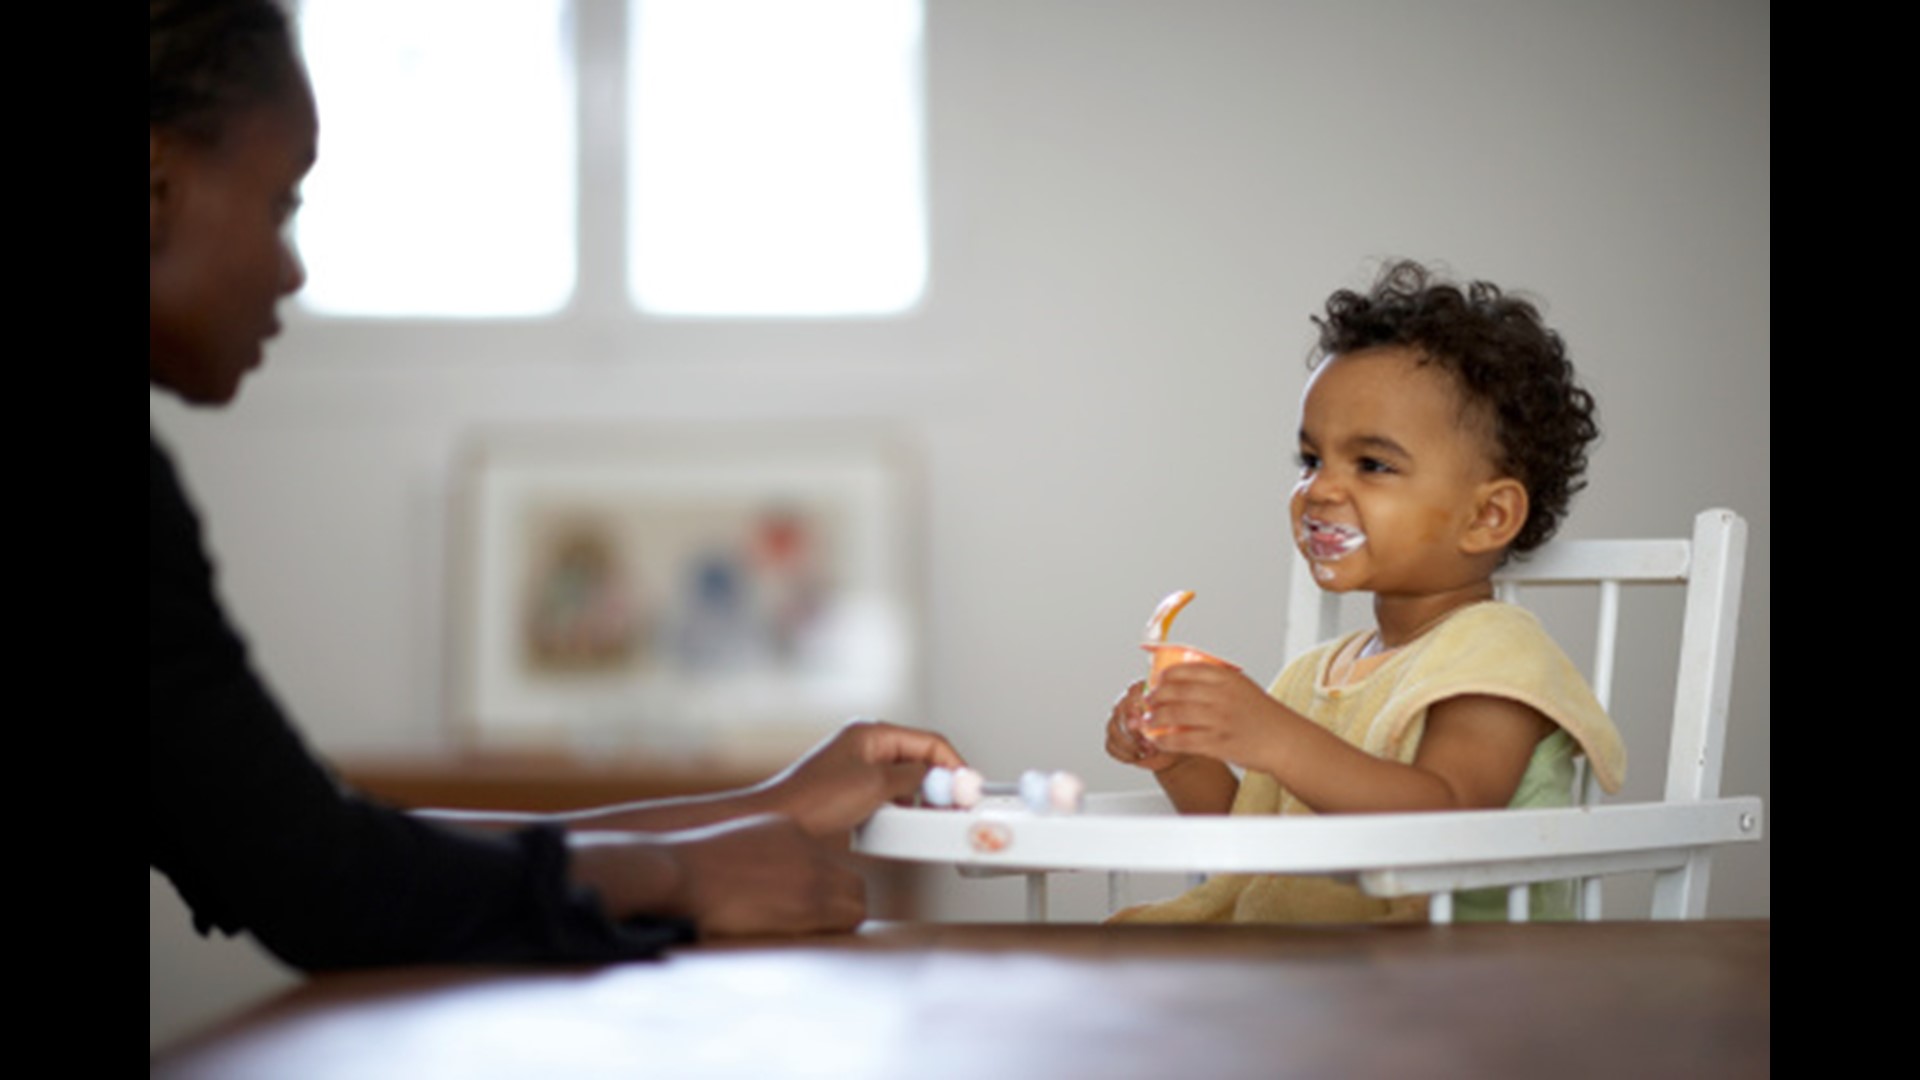 Hear from a medical expert on ways to transition your baby into healthy, toddler foods.